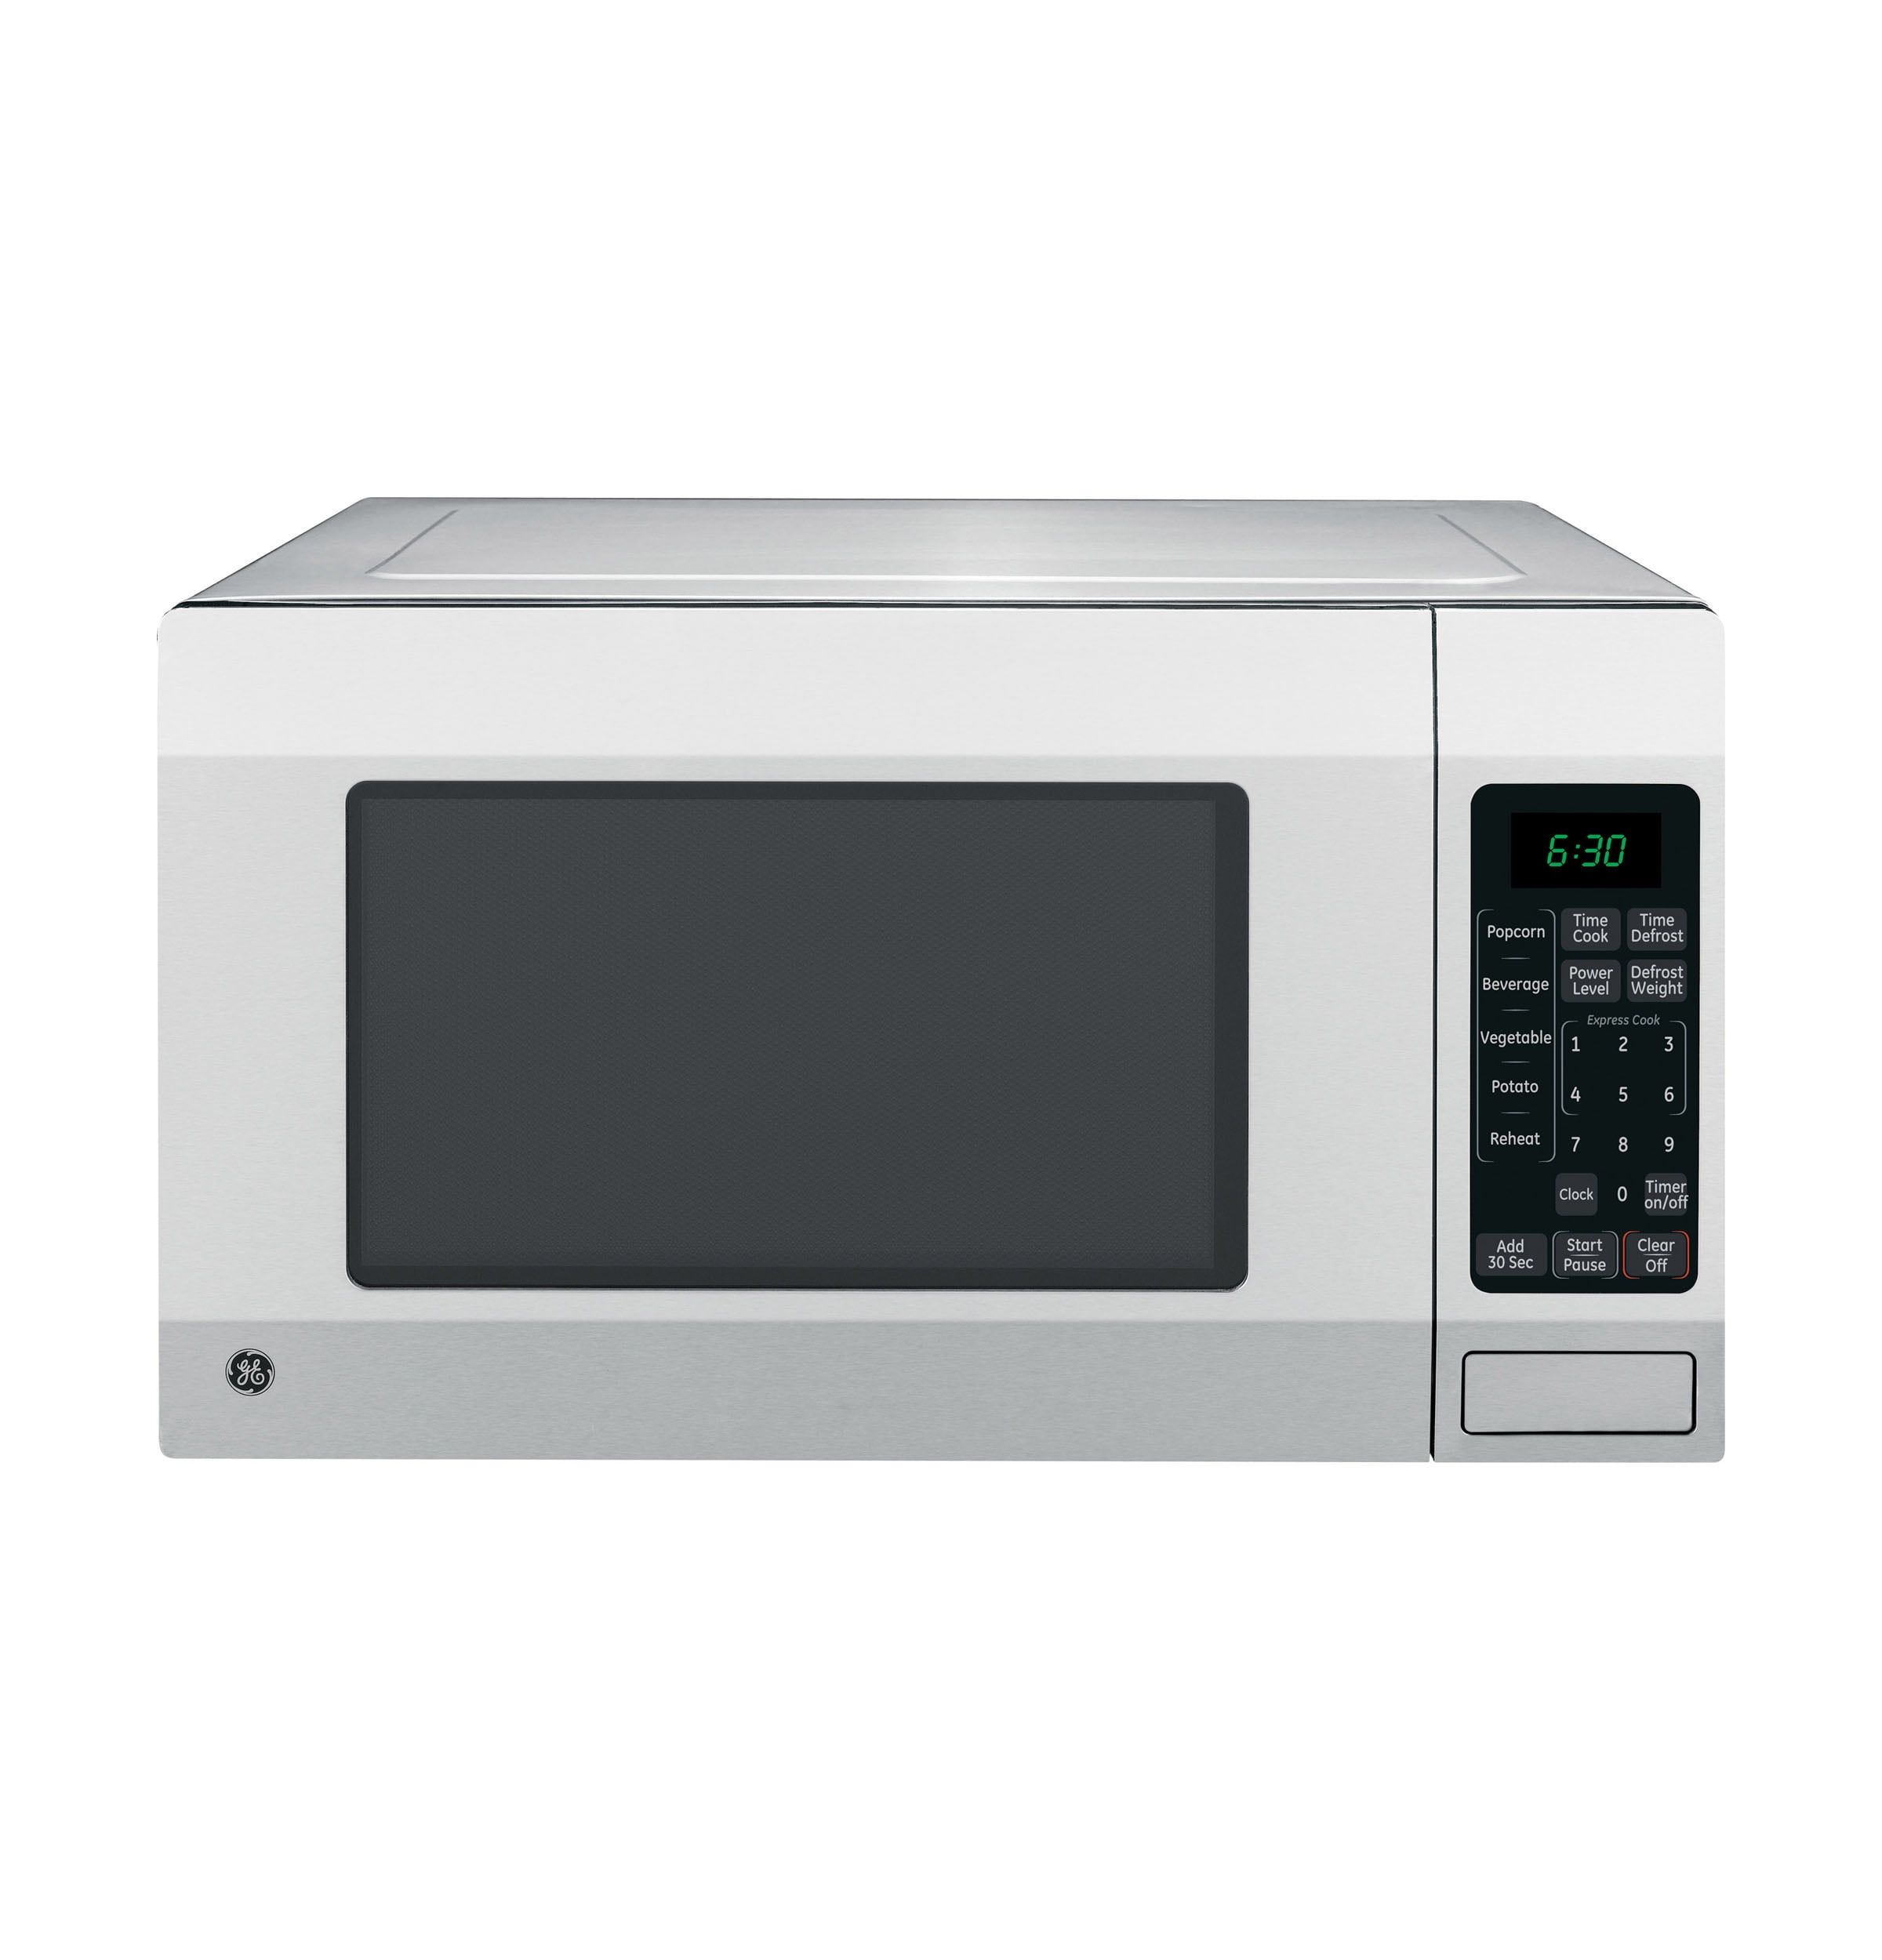 Ge 1 6 Cu Ft Countertop Microwave Oven Stainless 1150 Watts